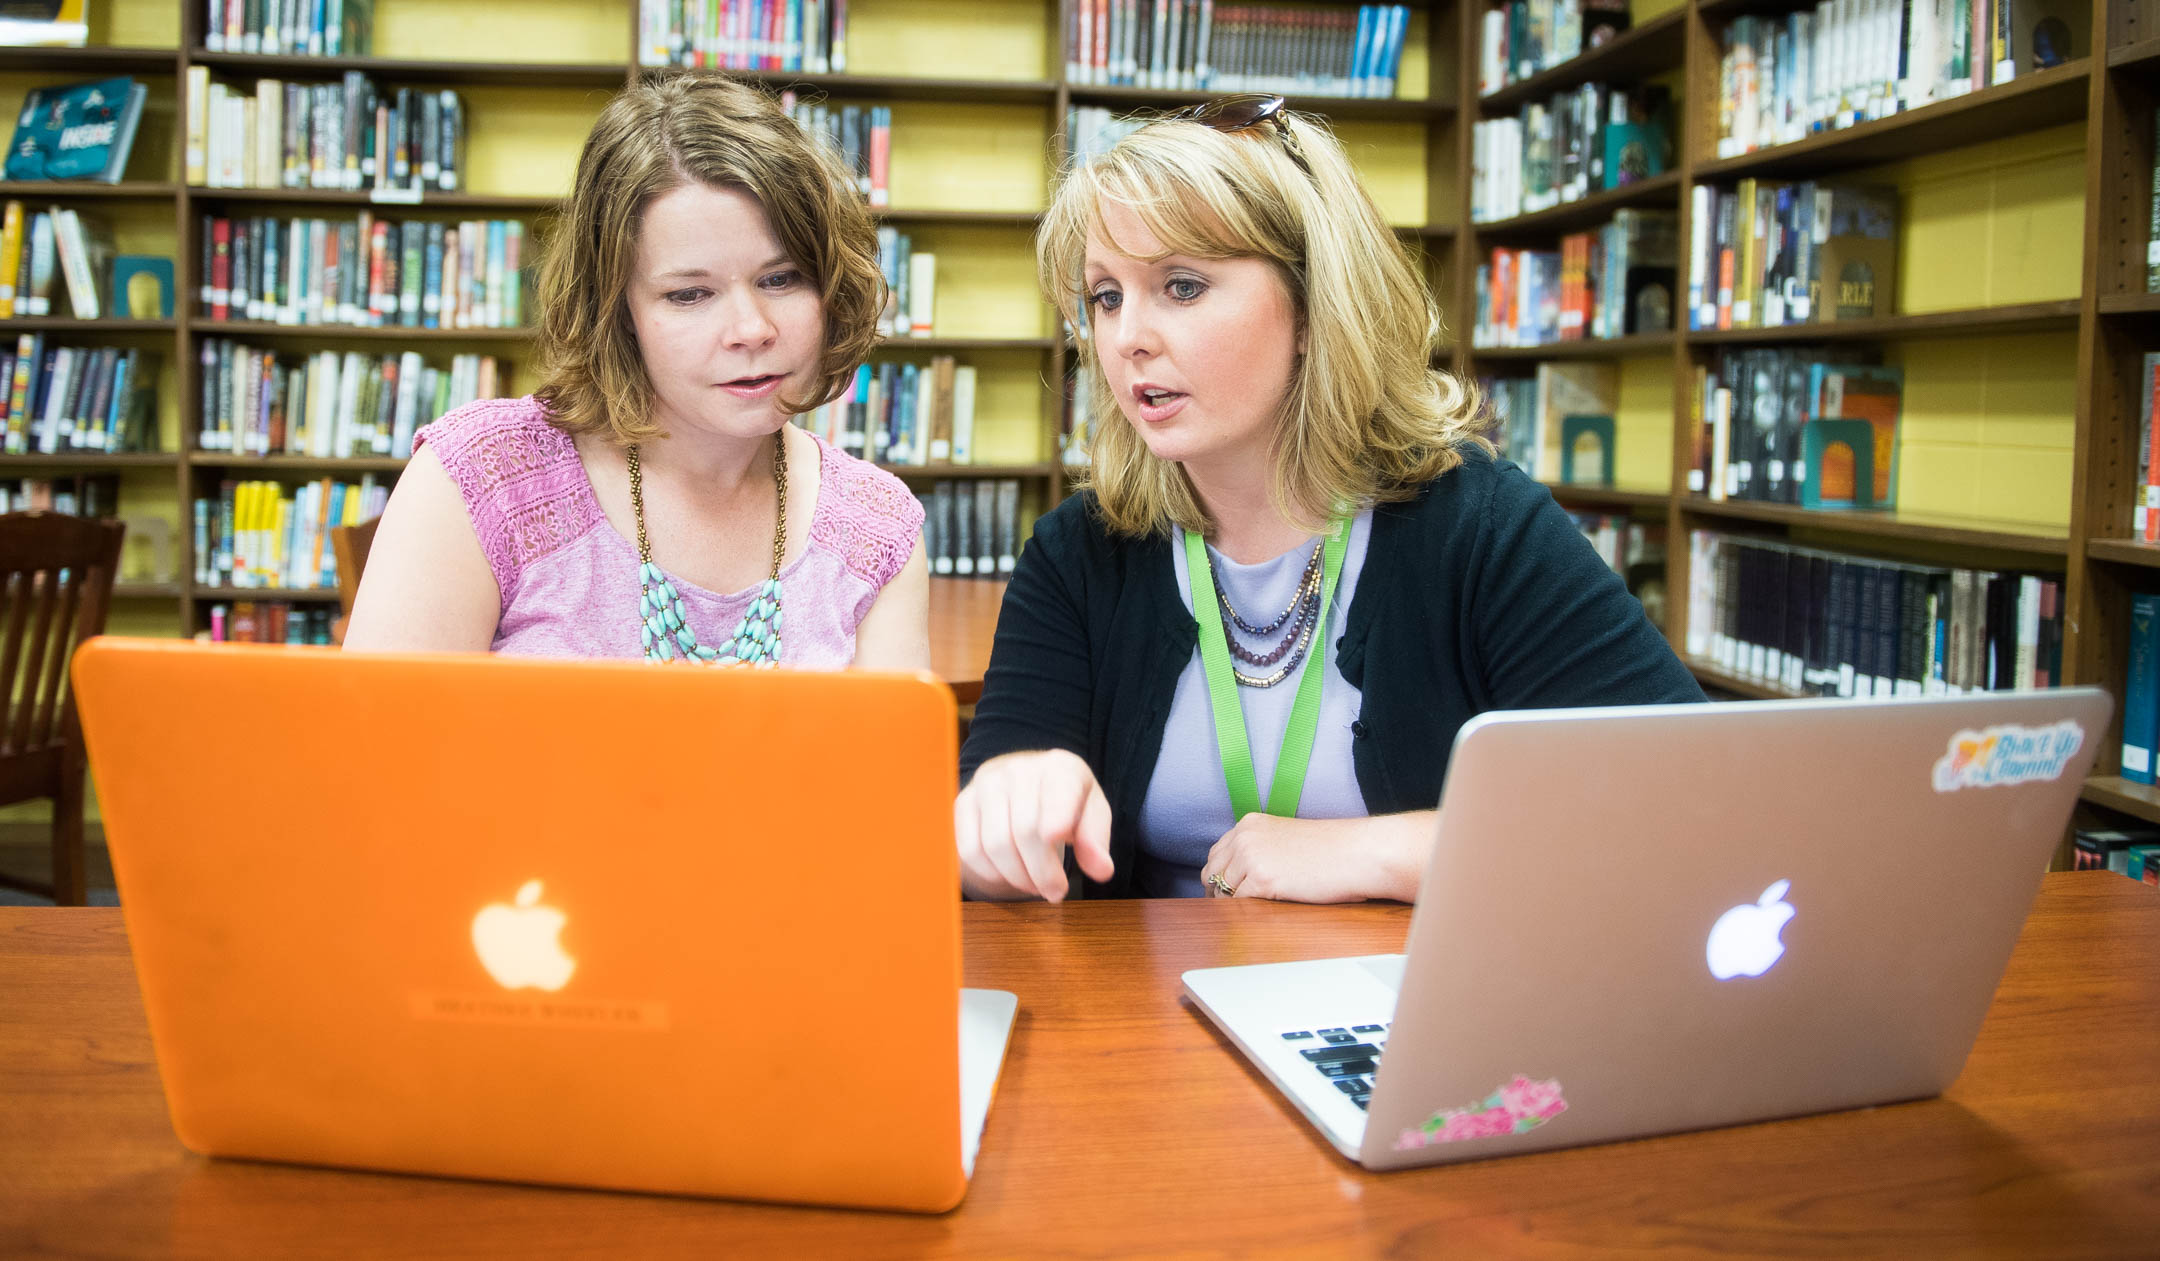 Stephanie Wade, right, the technology integration specialist for Boyle County schools, works with Heather Wheeler, a Spanish teacher at Boyle County High School, on Flipgrid, a program Wheeler uses to help her students submit assignments. Wade filled a newly created position in 2014 in which she collaborates with teachers to help them better use instructional software and network resources. Boyle County has since enlisted other teachers and library media specialists to assist her. Photo by Bobby Ellis, May 18, 2017